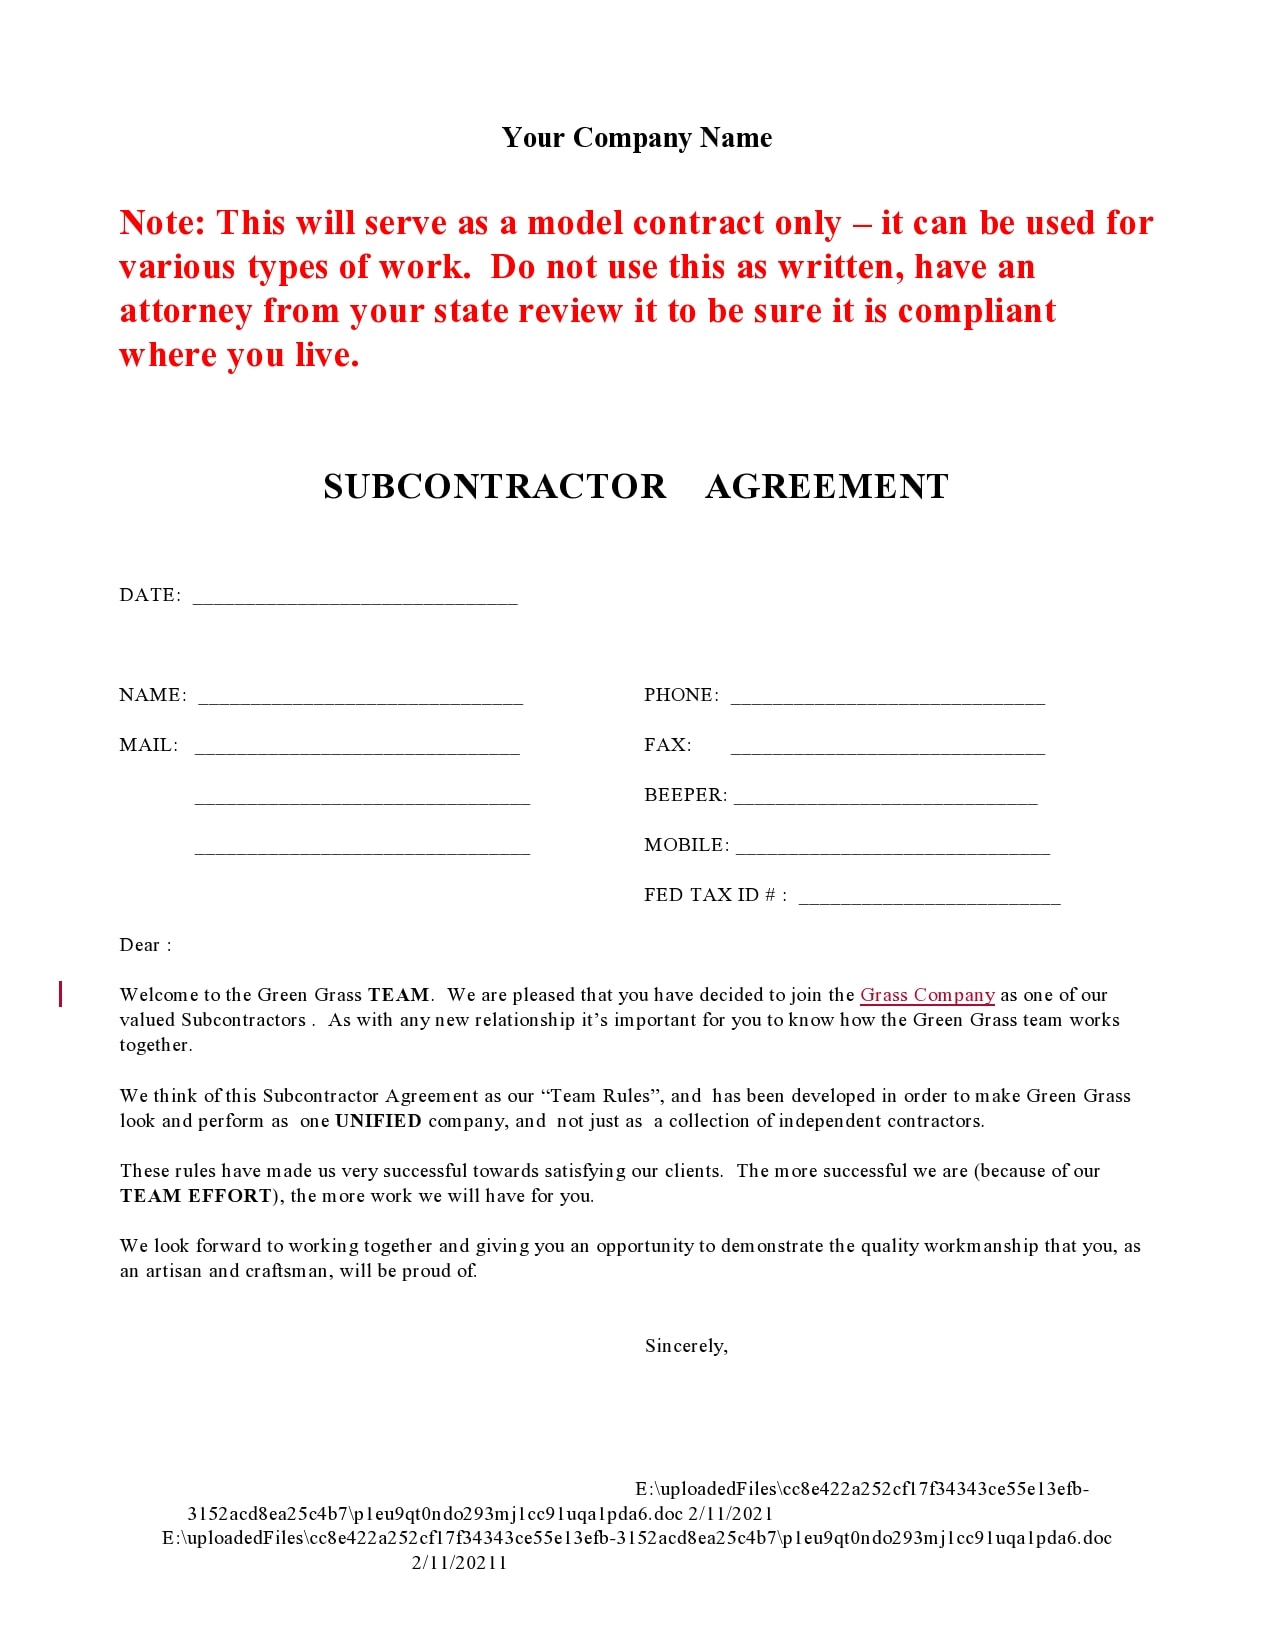 30 Free Subcontractor Agreement Templates (Word, PDF)